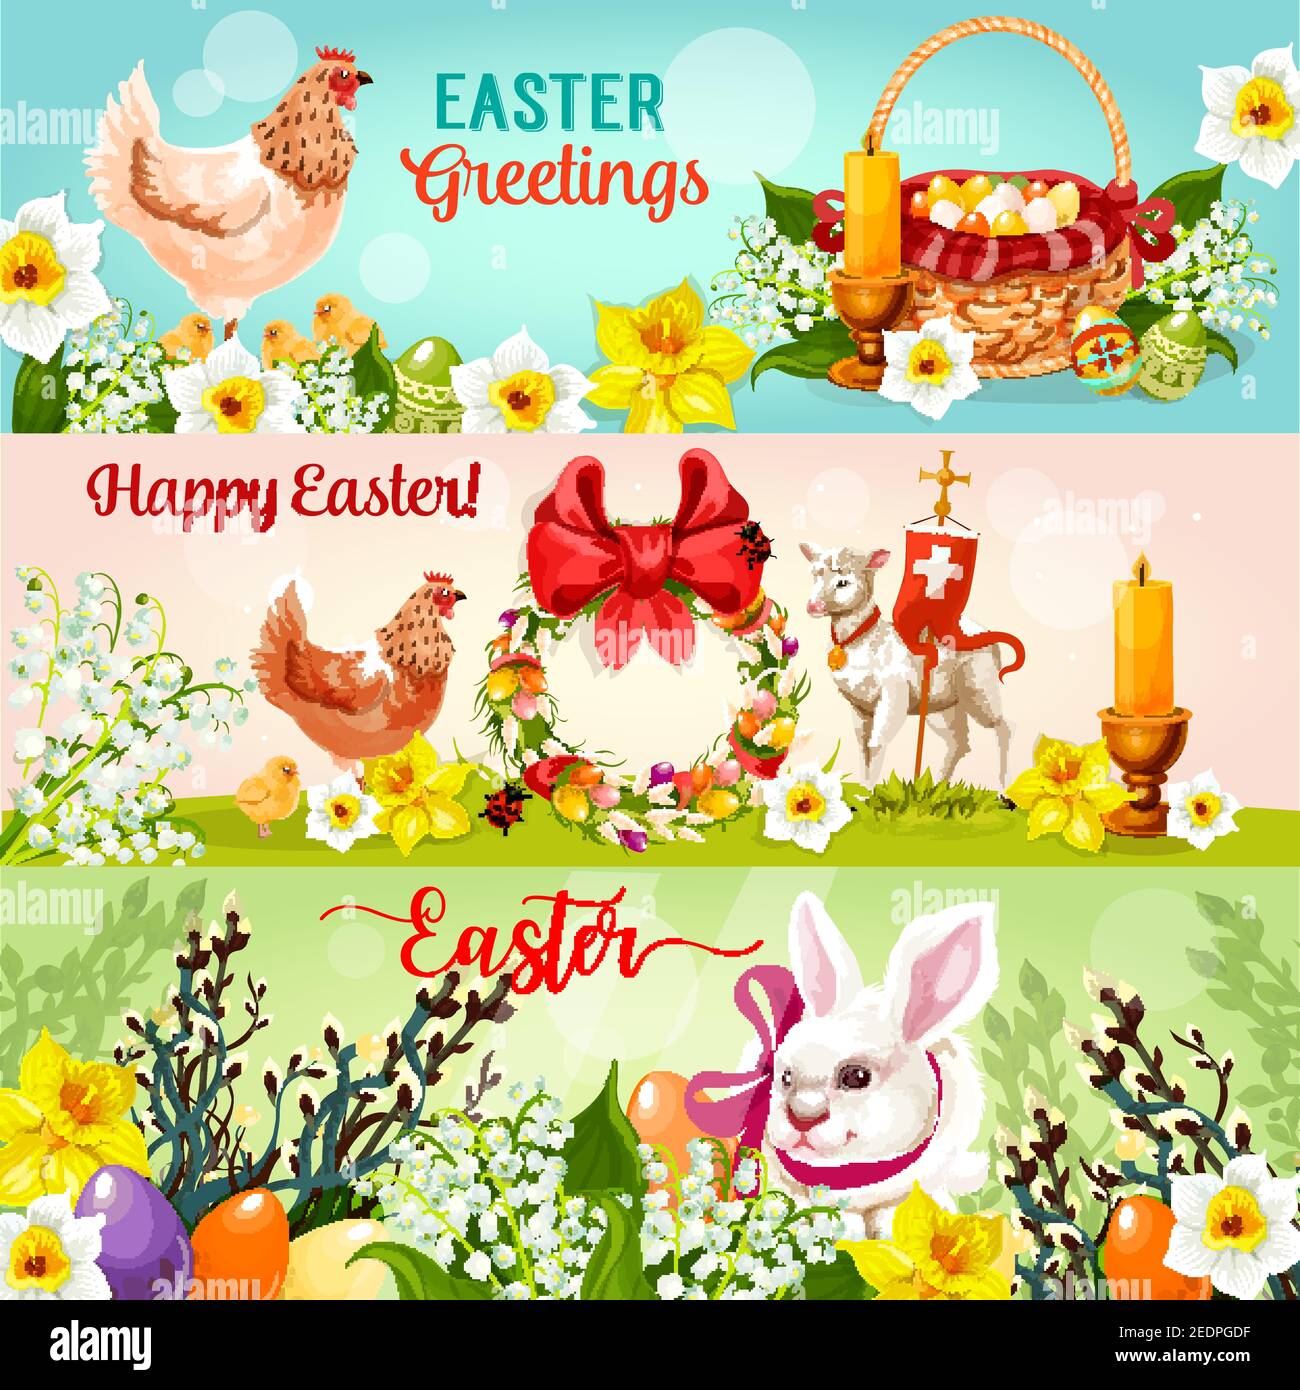 Happy Easter greetings banners. Easter rabbit bunny with egg hunt basket, chicken, chick, spring flowers, lamb of God with cross, floral wreath with E Stock Vector